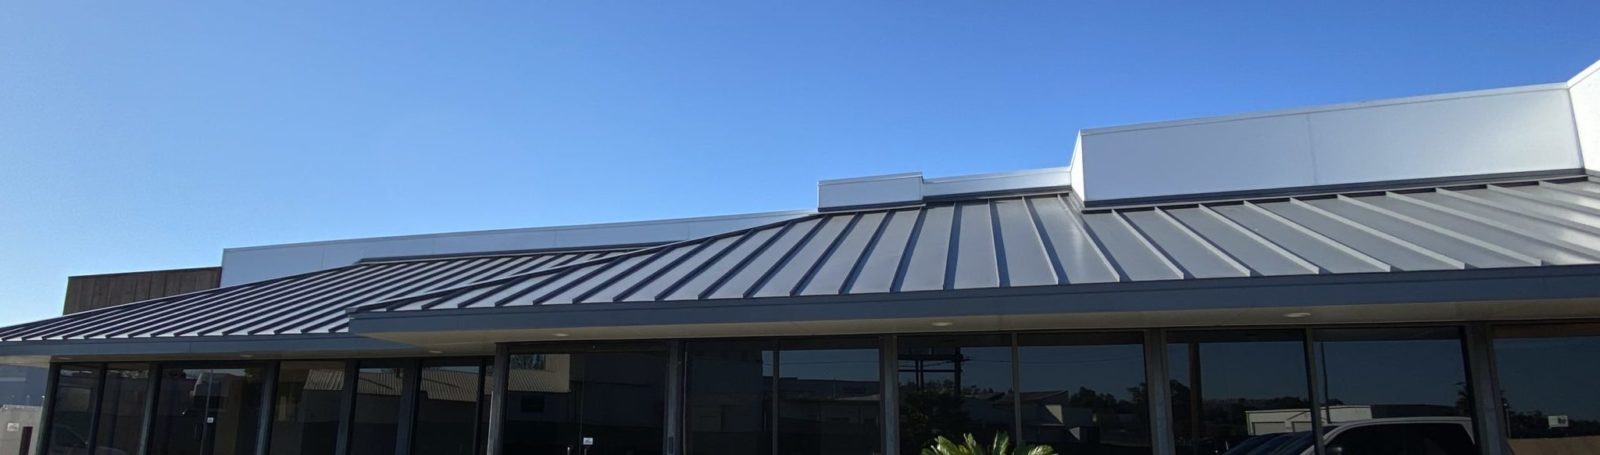 Sylvester Roofing Office Metal Roof